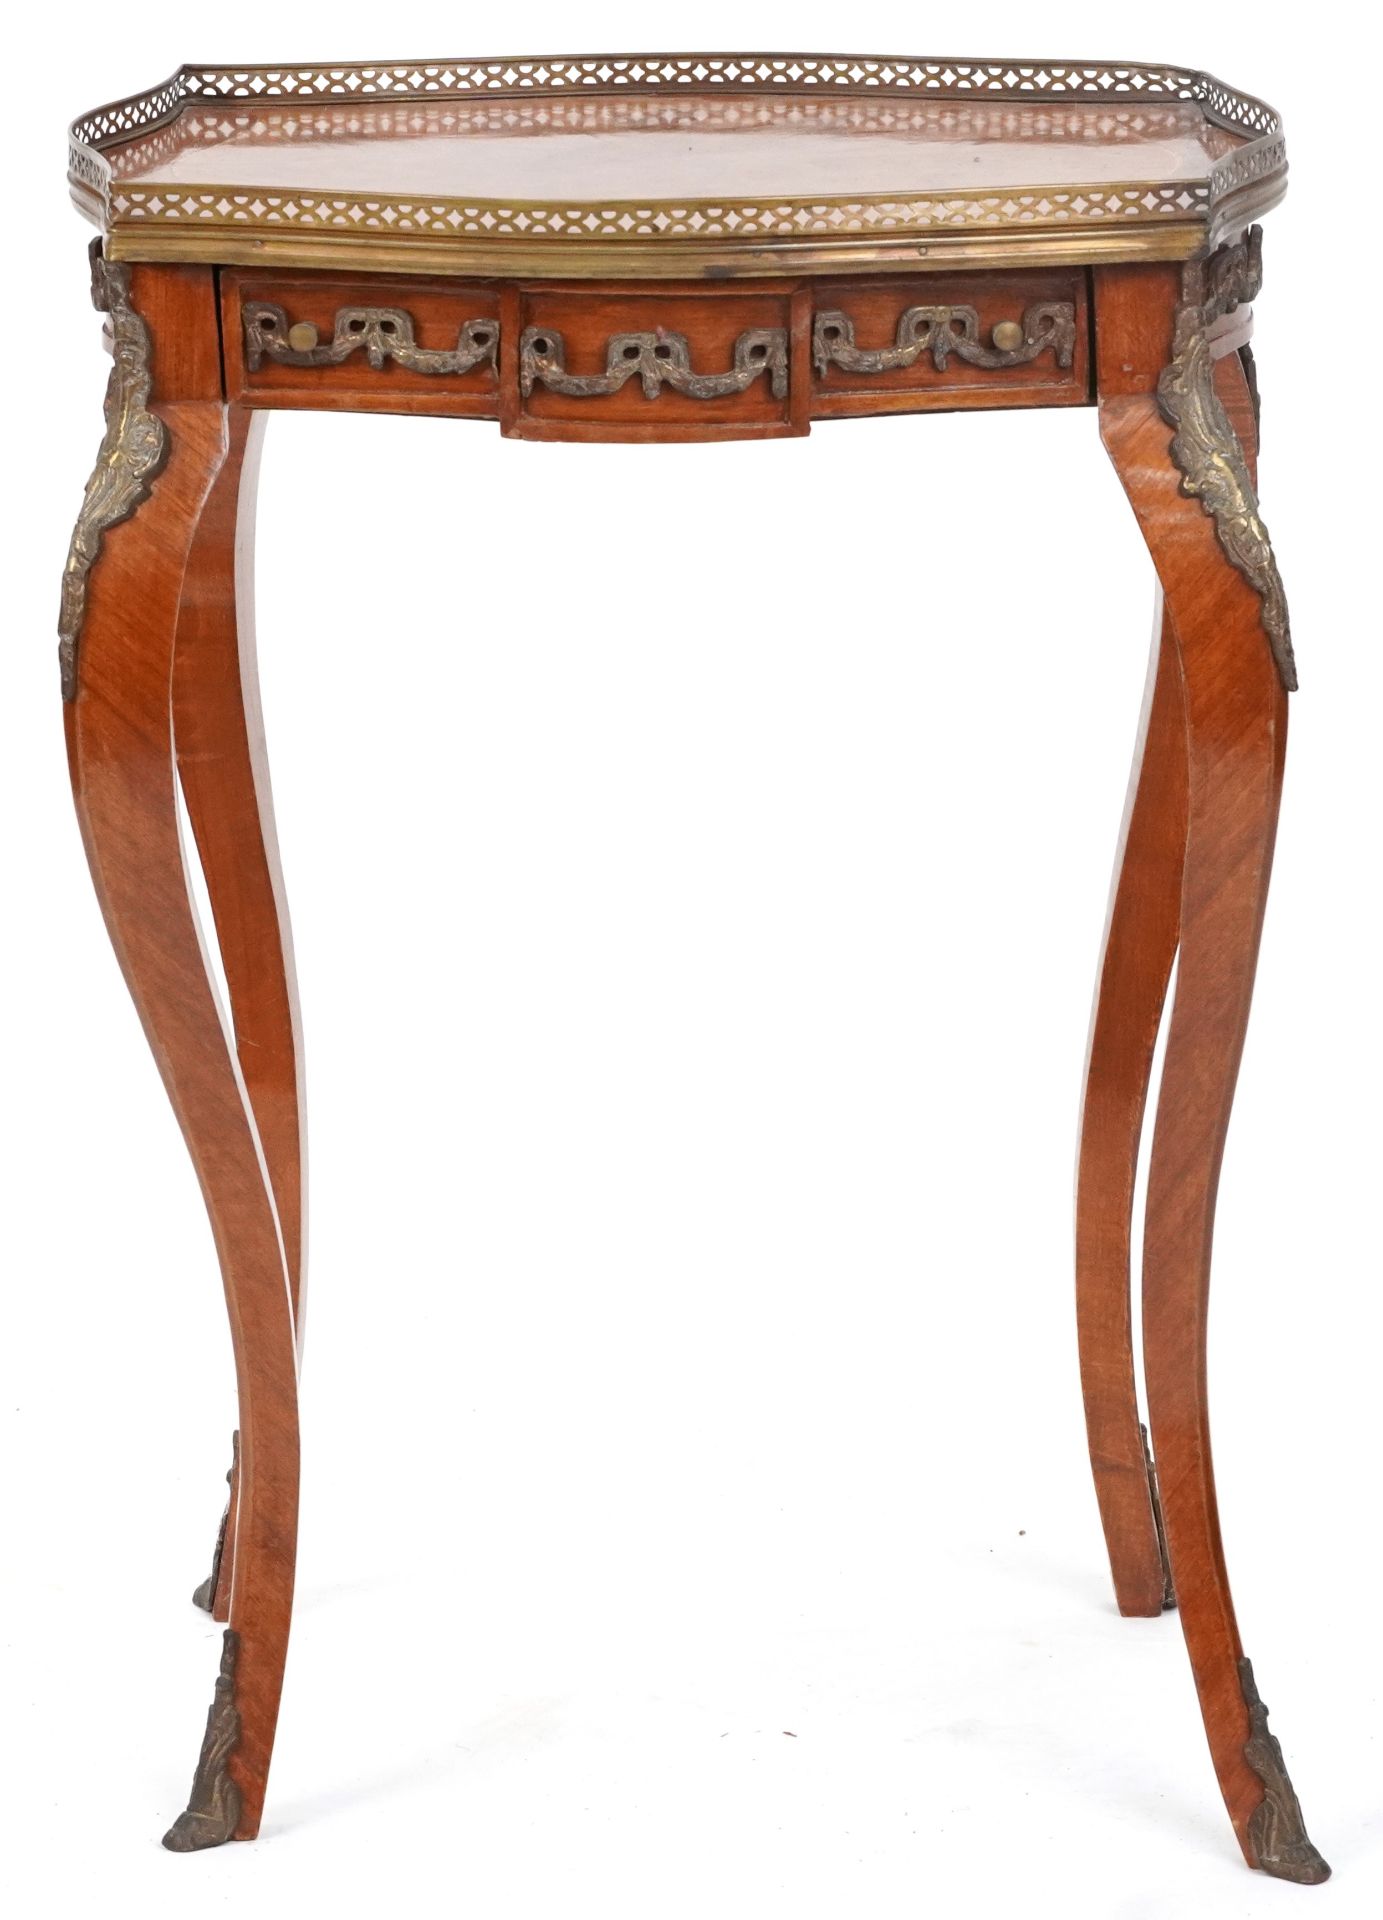 French Louis XV style inlaid kingwood side table with frieze drawer and brass mounts on cabriole - Image 2 of 4